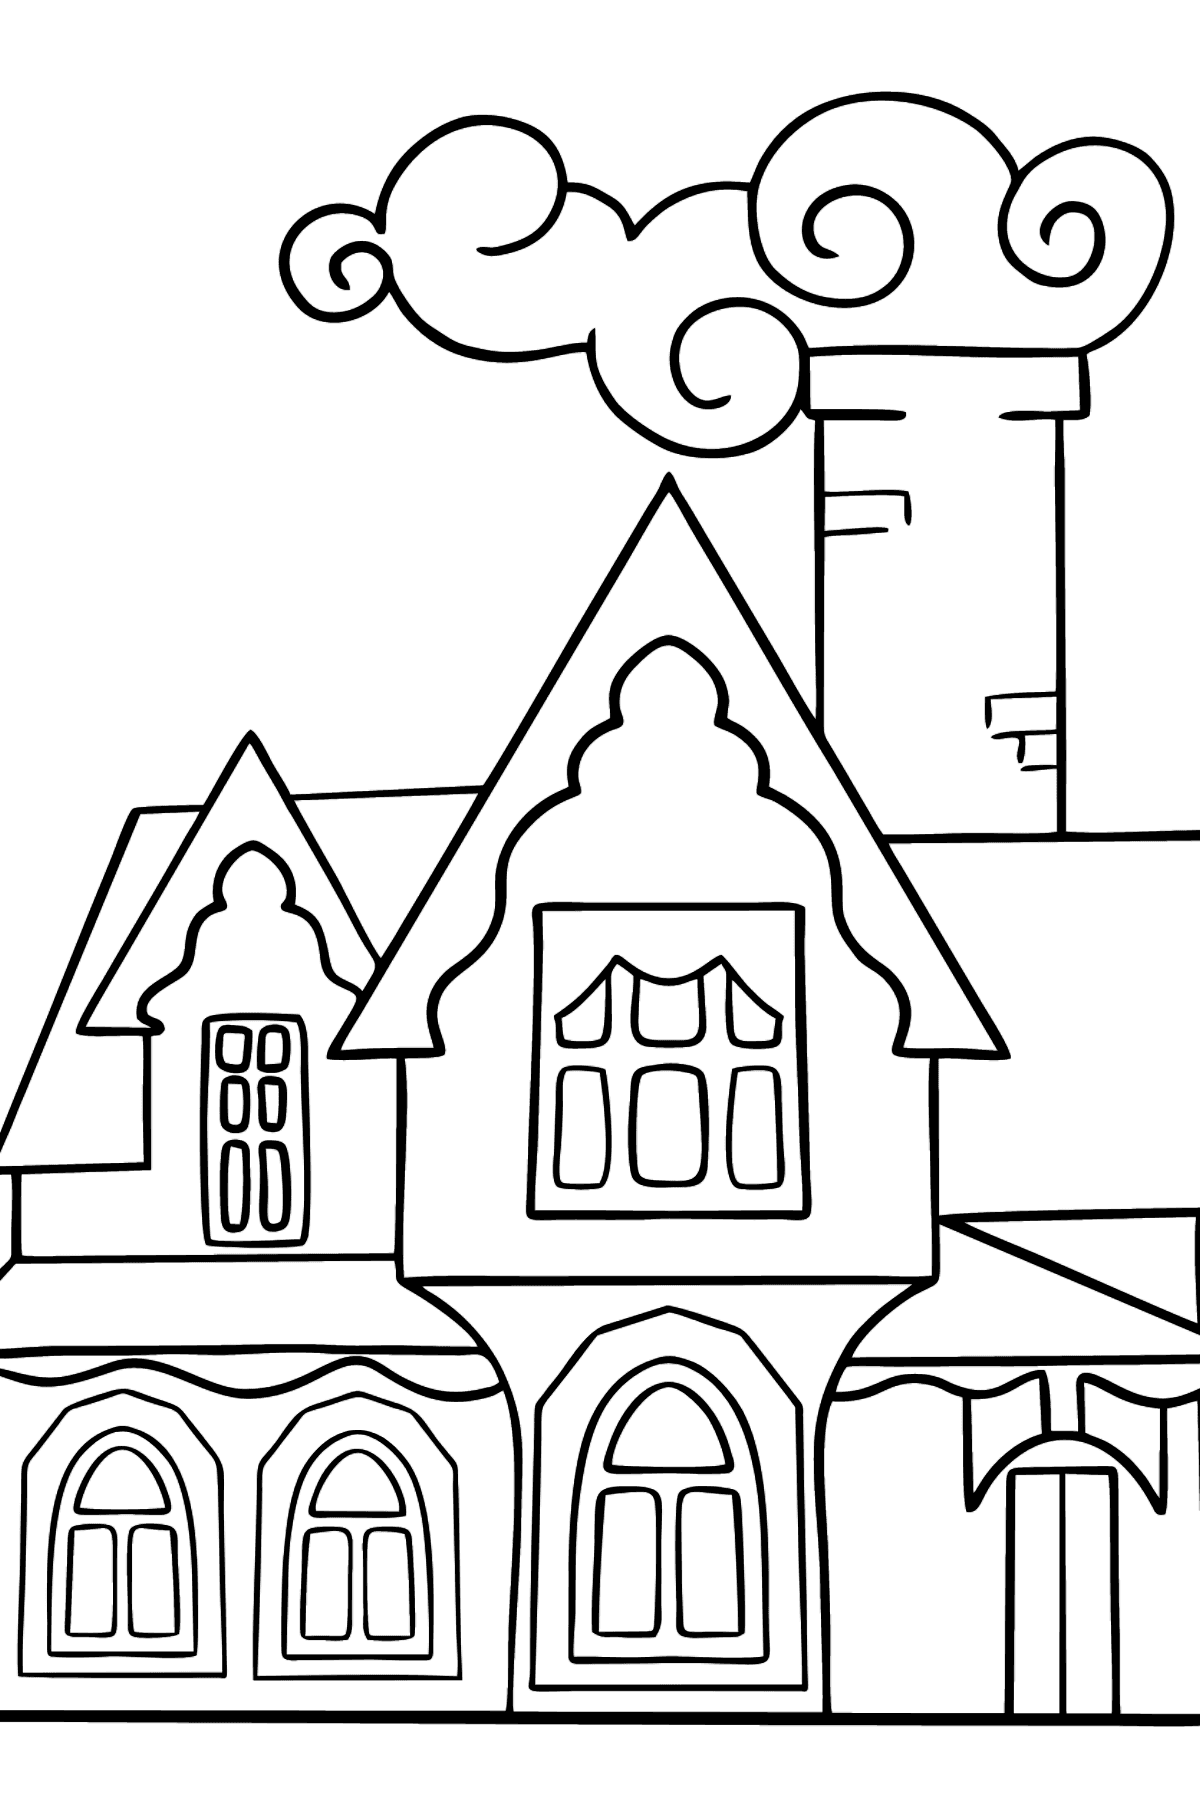 Simple Coloring Page - A Miraculous House - Coloring Pages for Kids